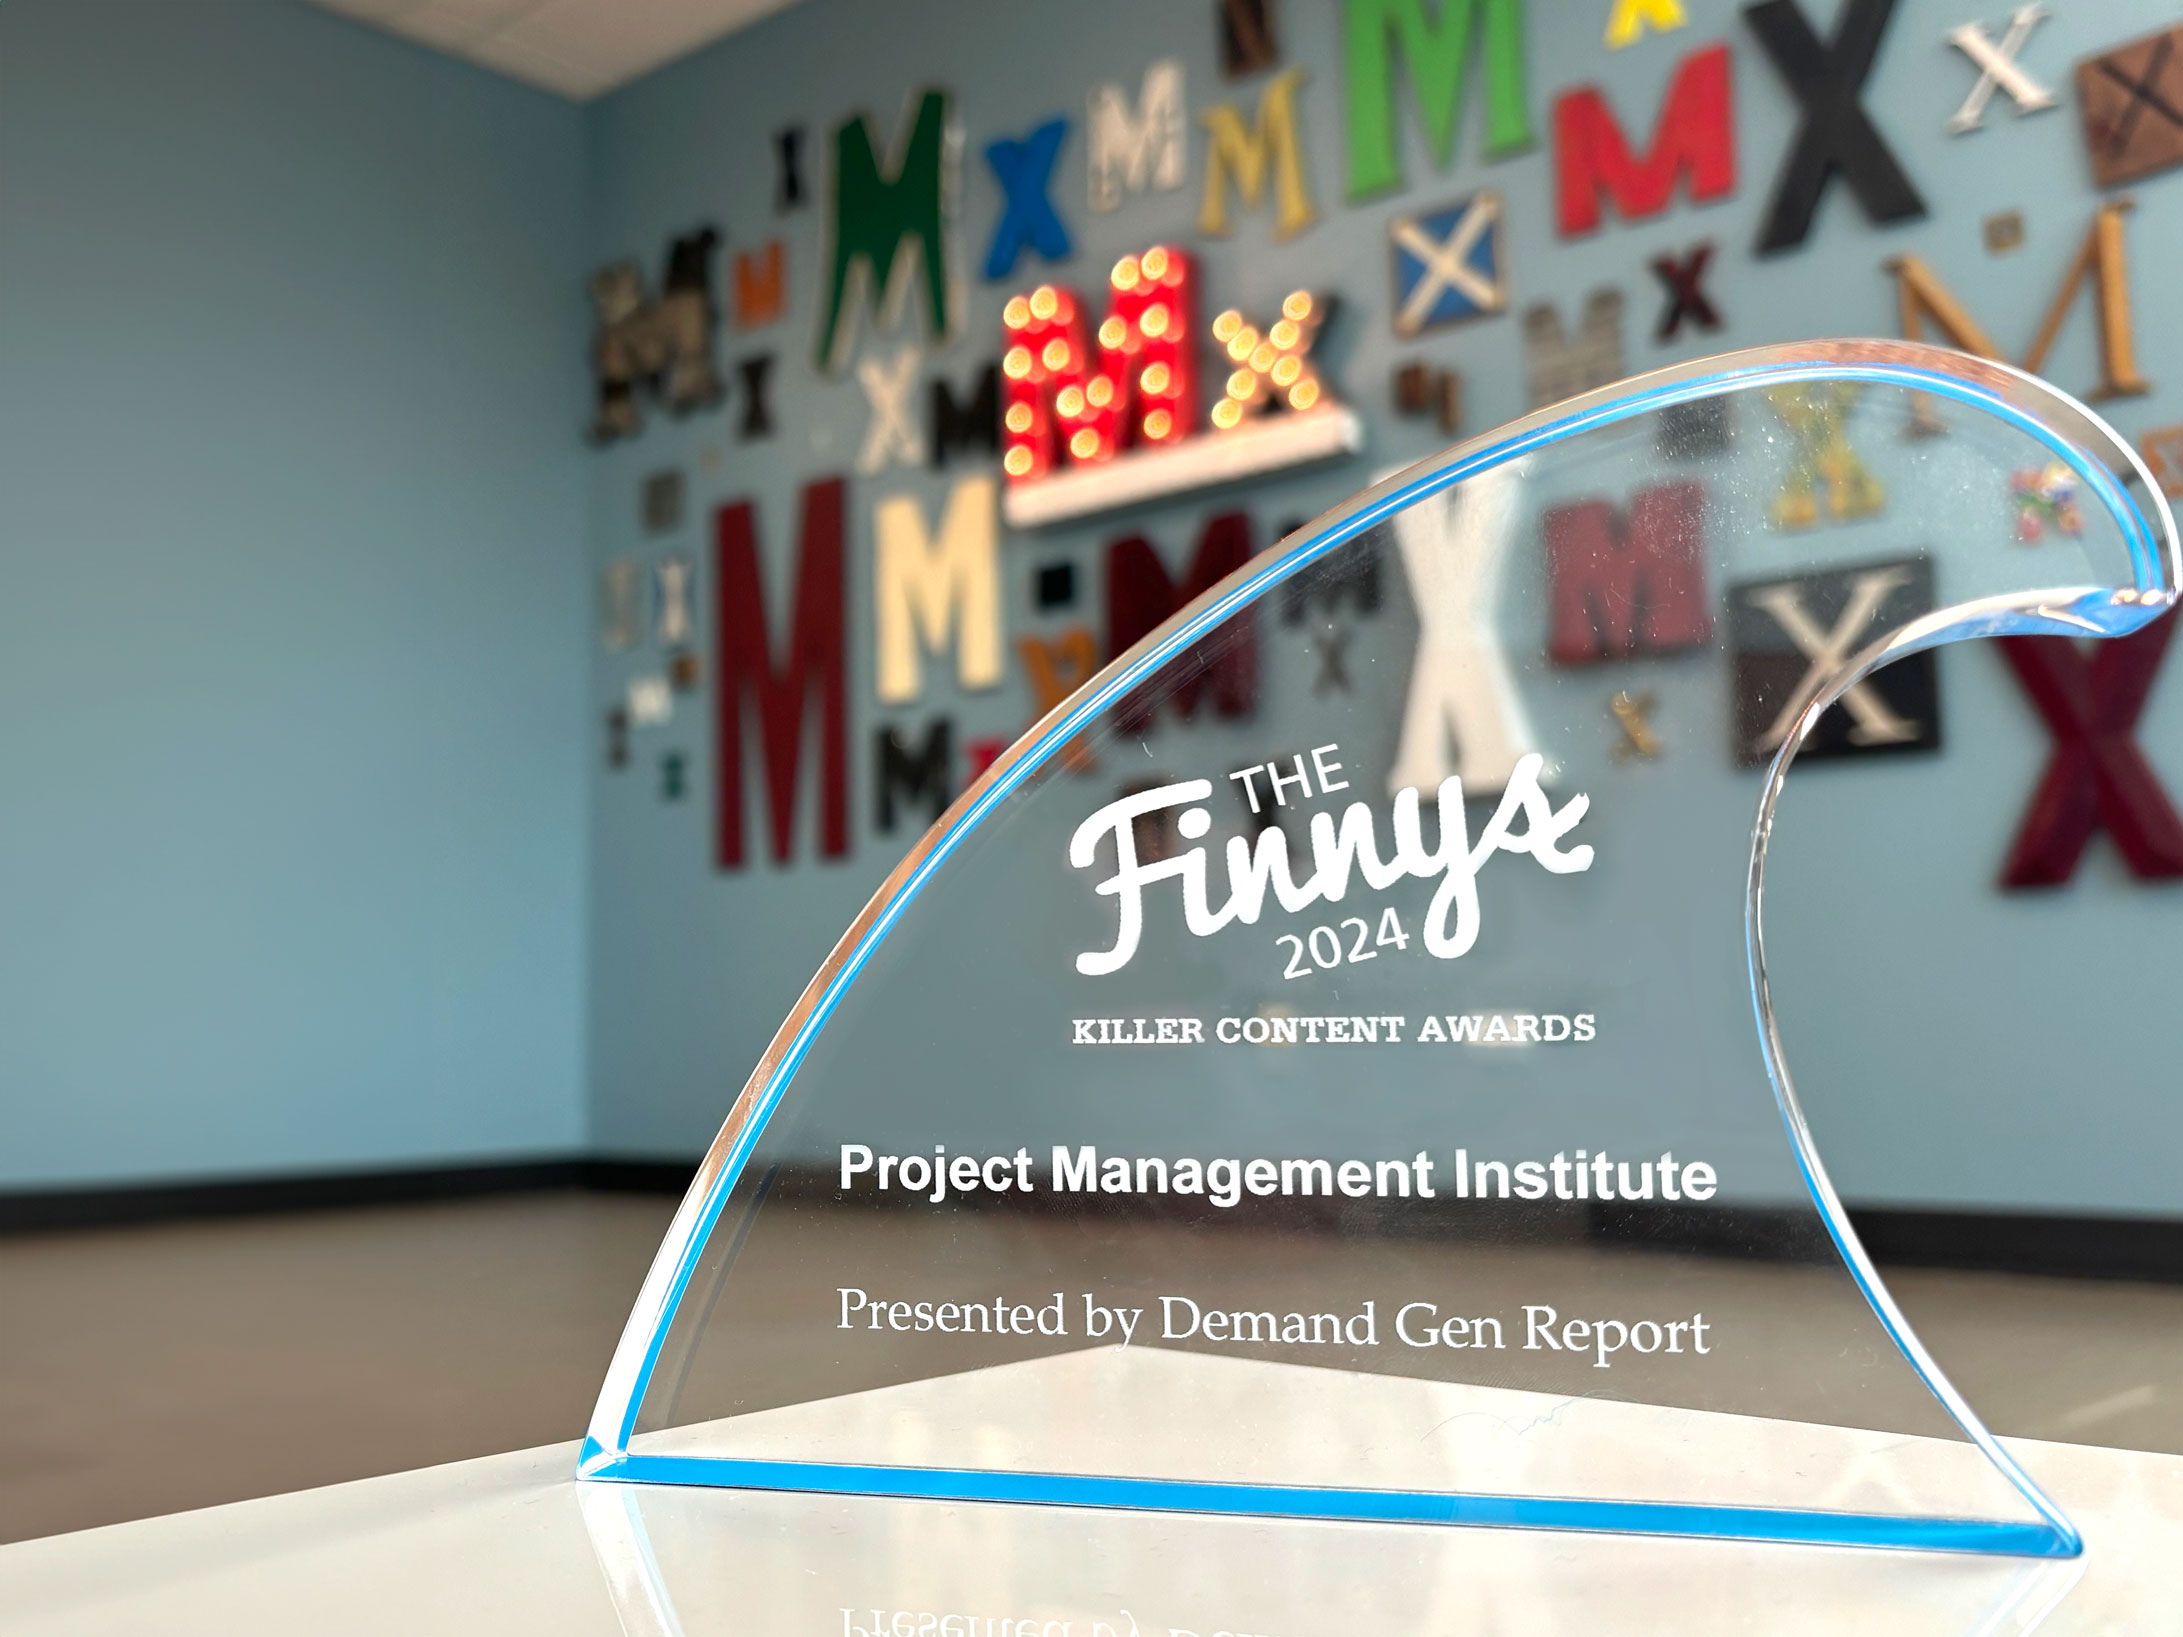 Glass finny award for Project Management Institute's Projectified podcast from Demand Gen Report